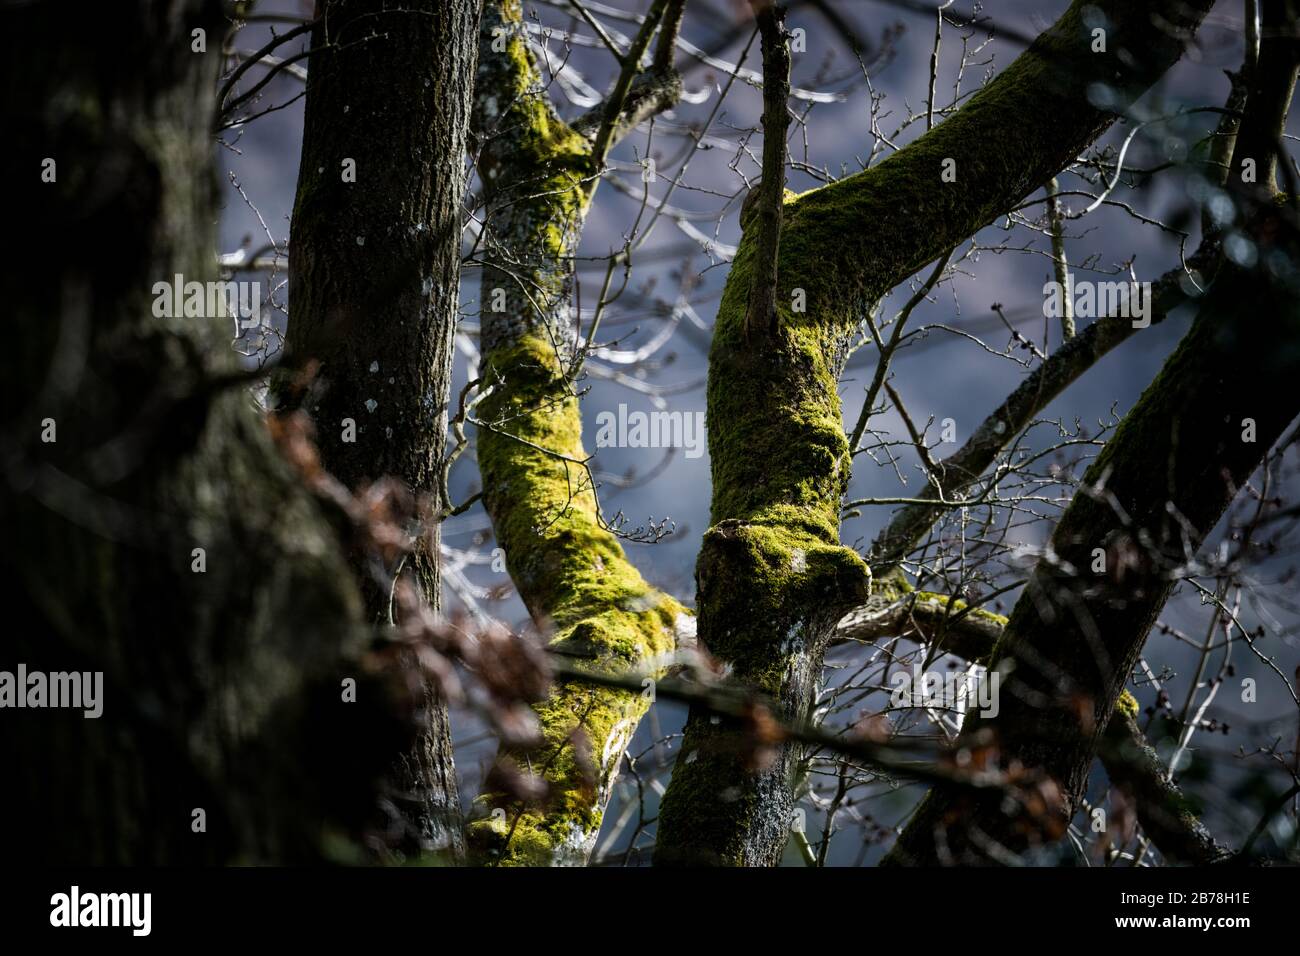 Looking between the trucks of established trees towards trees with moss on the trunks and branches lit by bright sunlight. Stock Photo